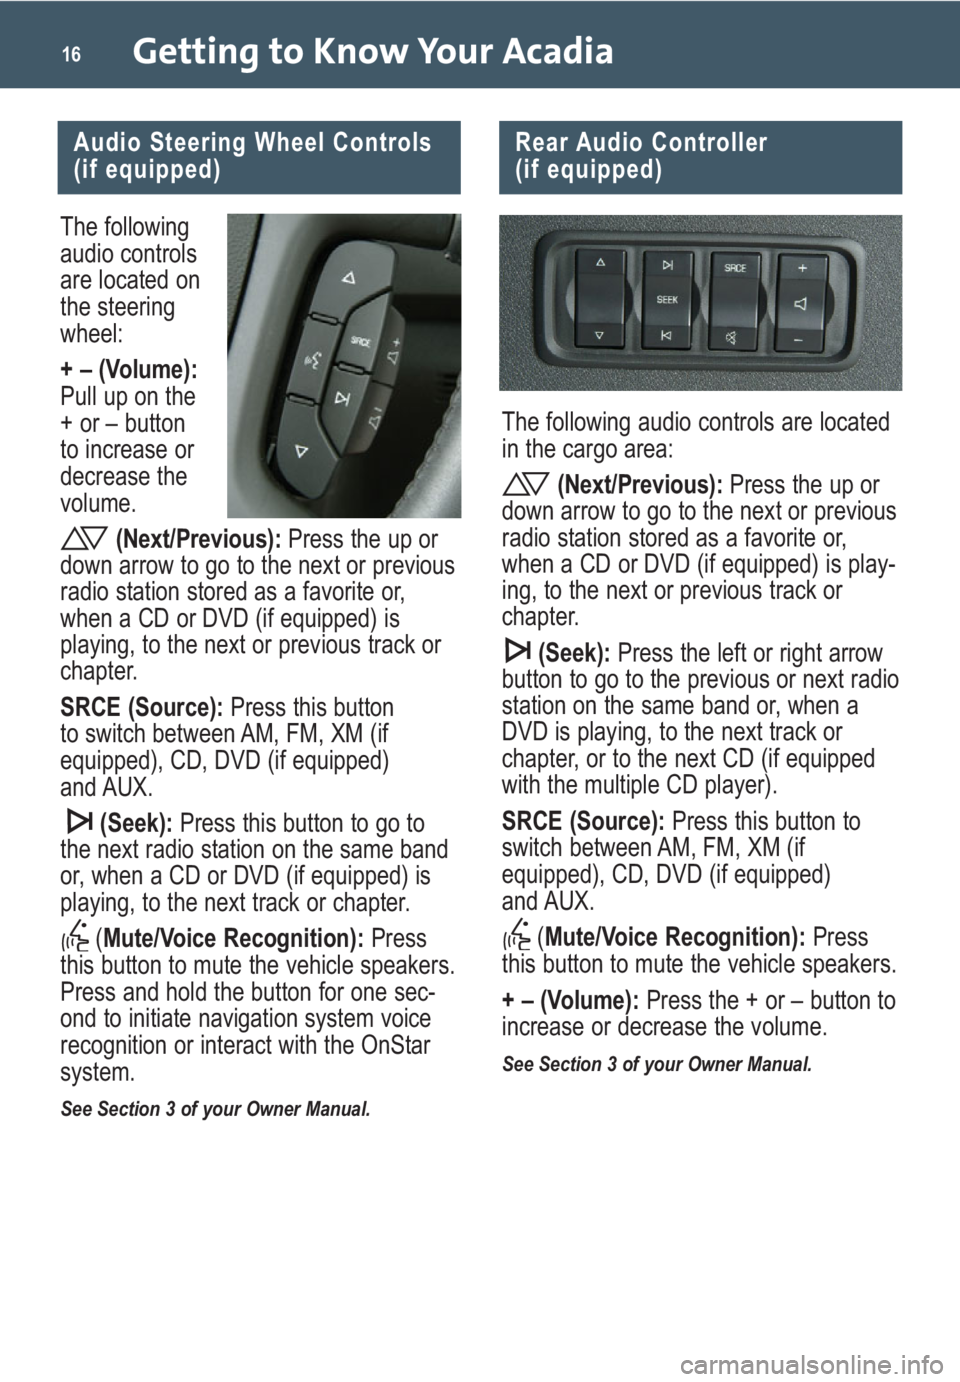 GMC ACADIA 2008  Get To Know Guide Getting to Know Your Acadia16
The following
audio controls
are located on
the steering
wheel:
+ – (Volume):
Pull up on the
+ or – button
to increase or
decrease the 
volume.
(Next/Previous):Press 